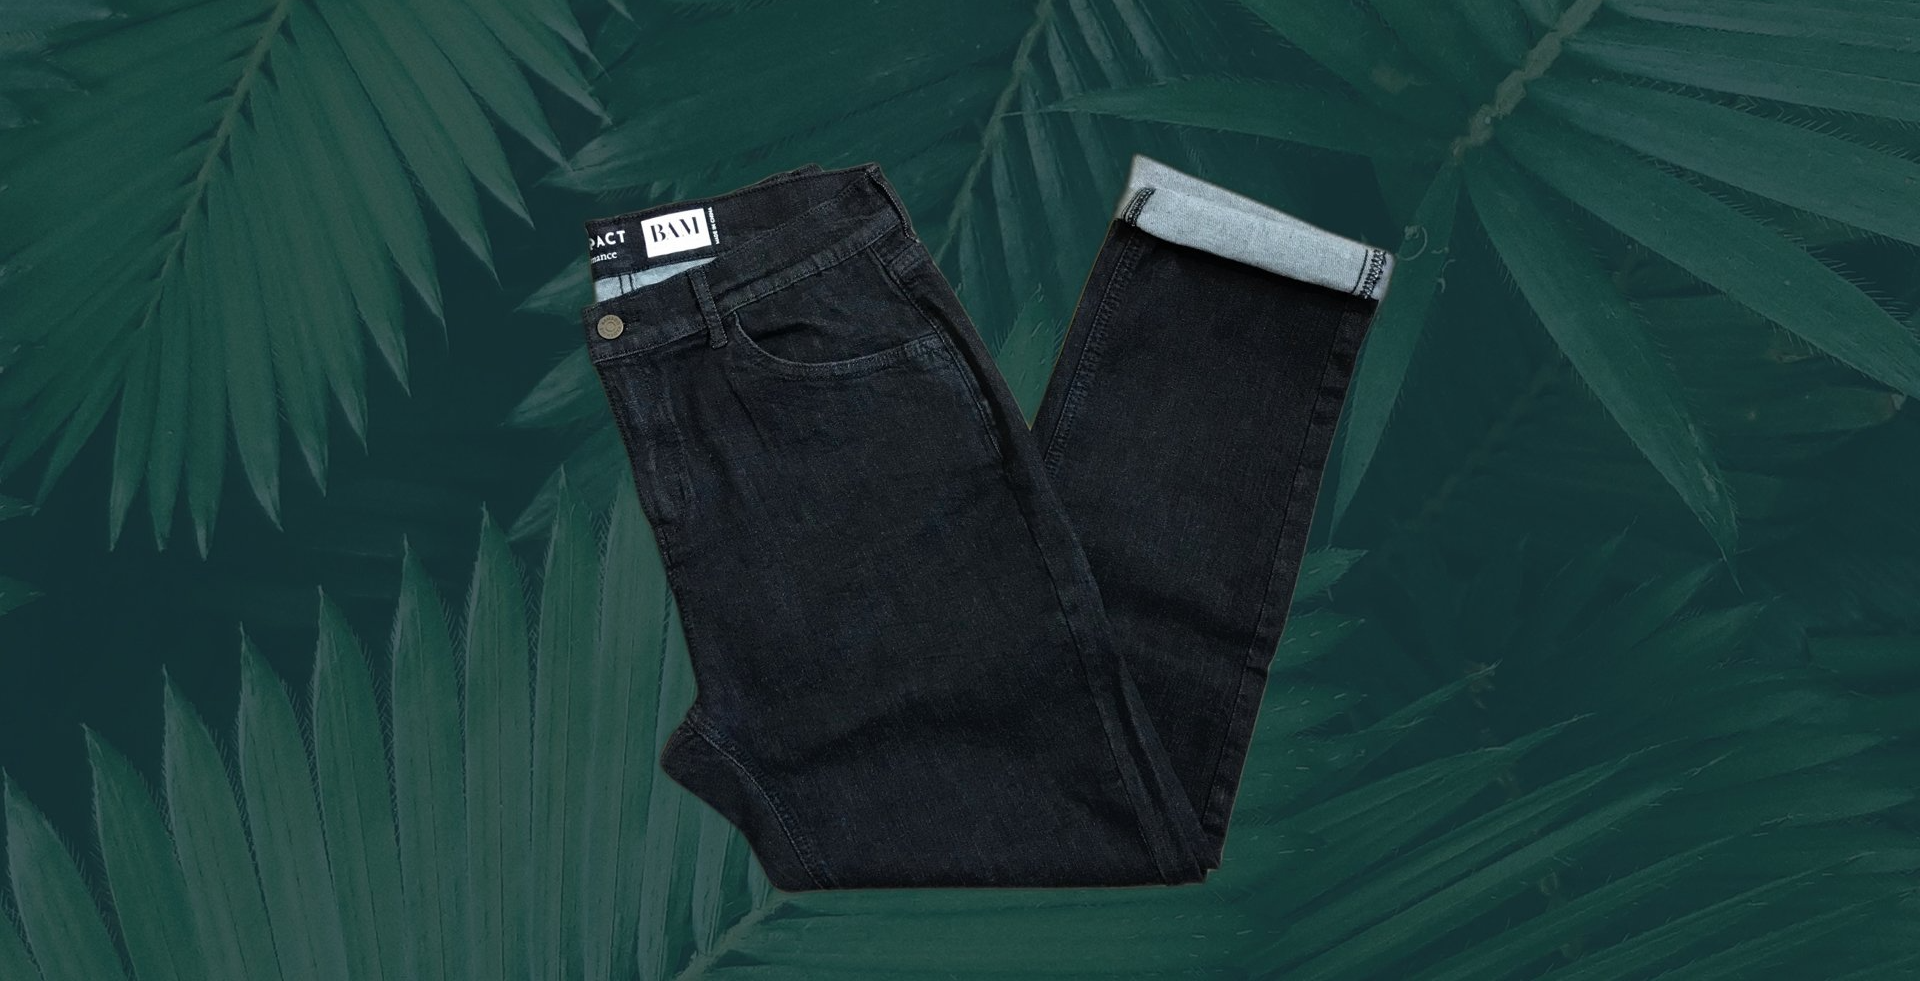 sustainable bamboo jeans